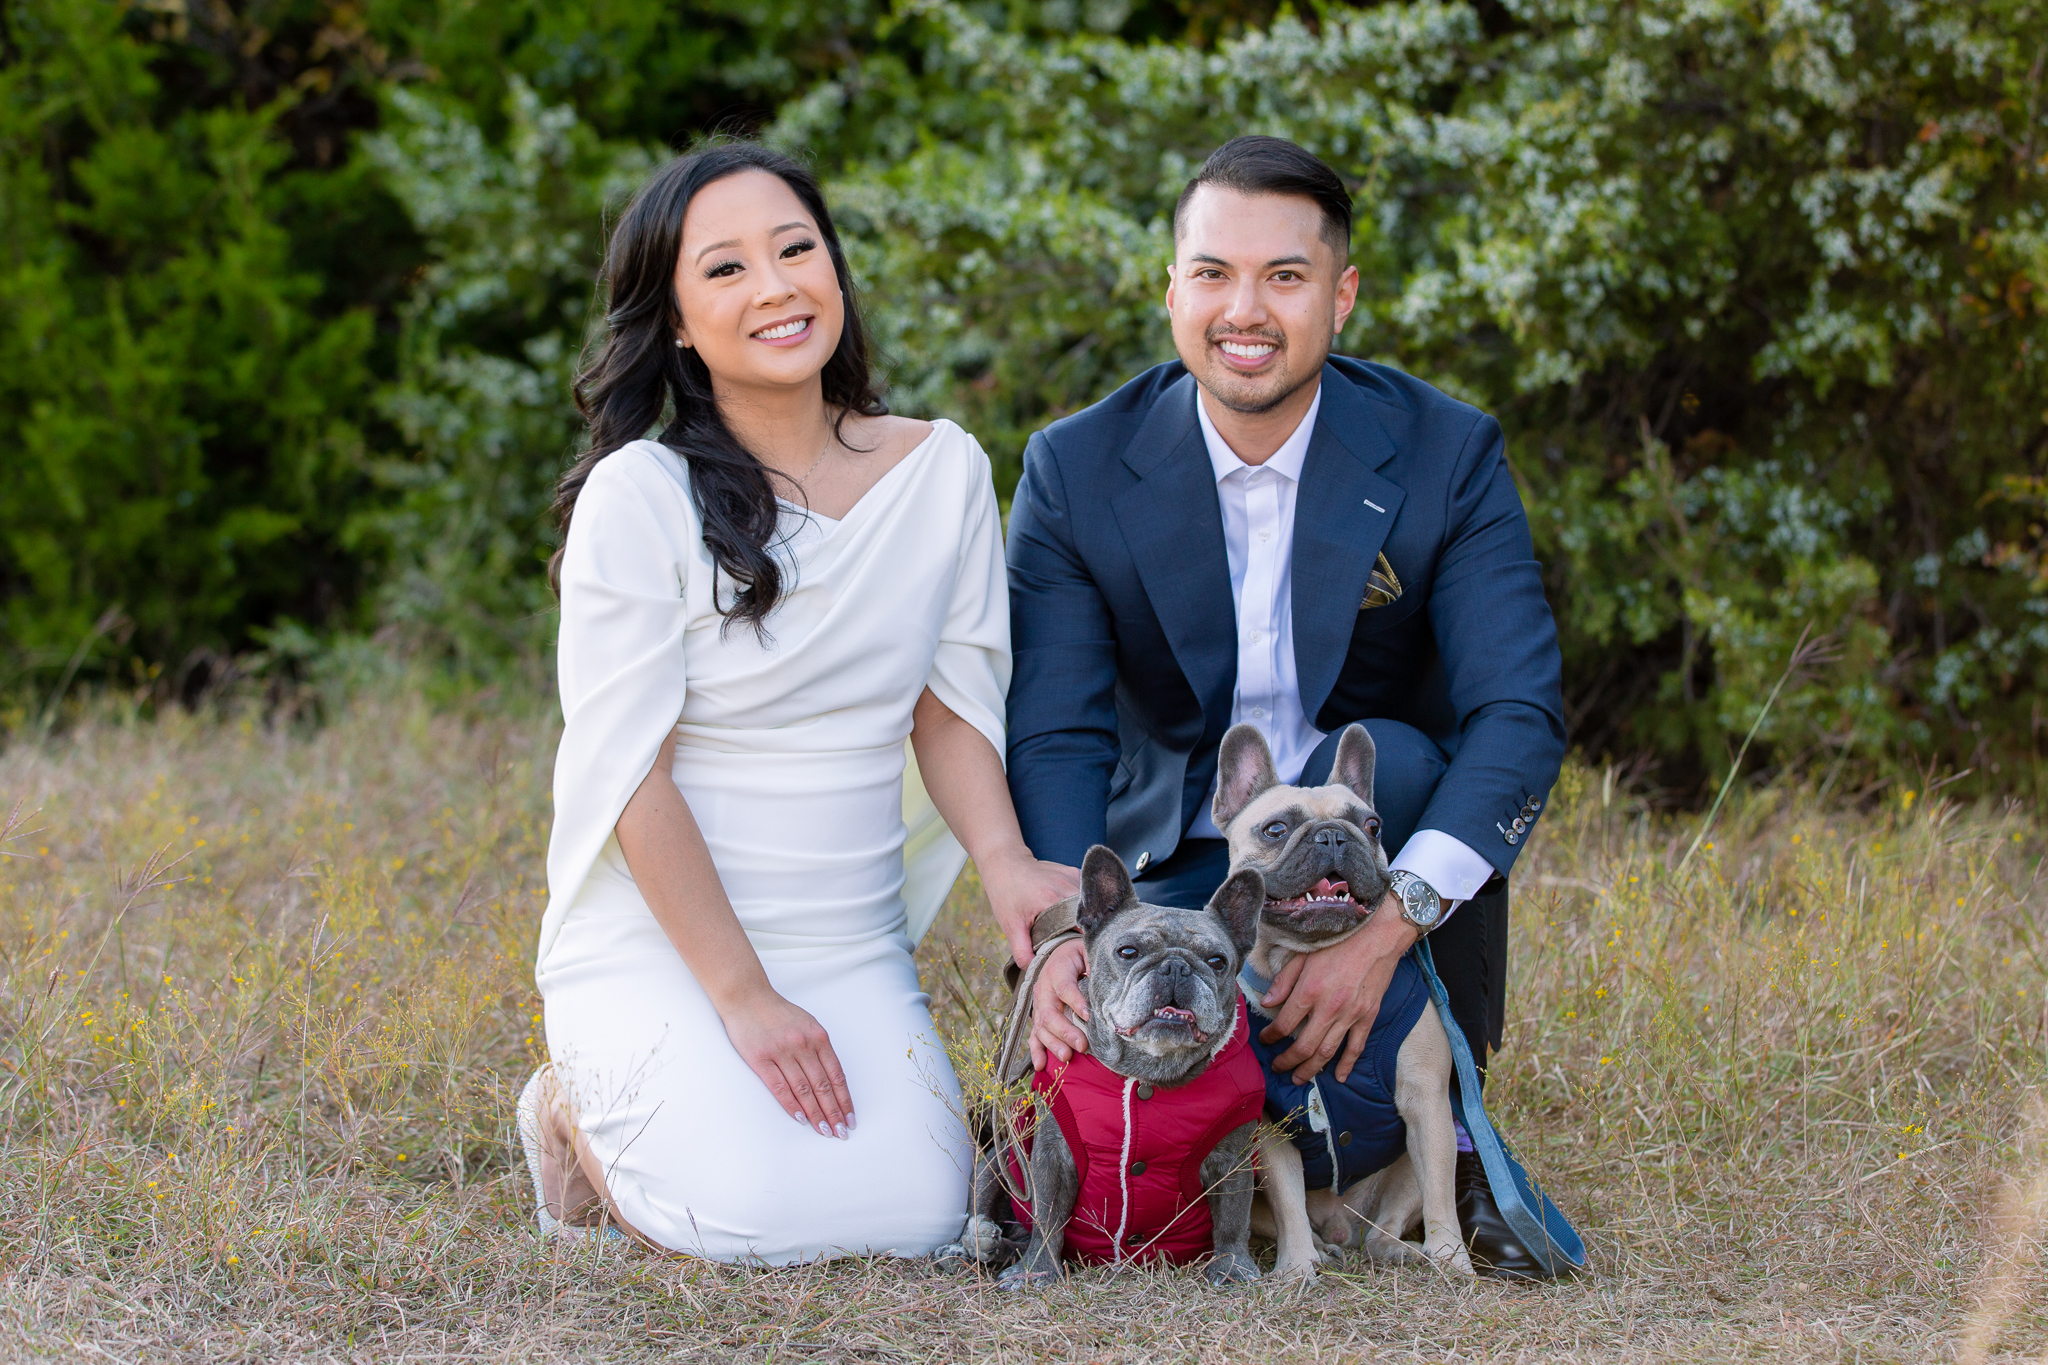 Bride and groom kneeling in Arbor Hills Nature Preserve with 2 pups during engagement session